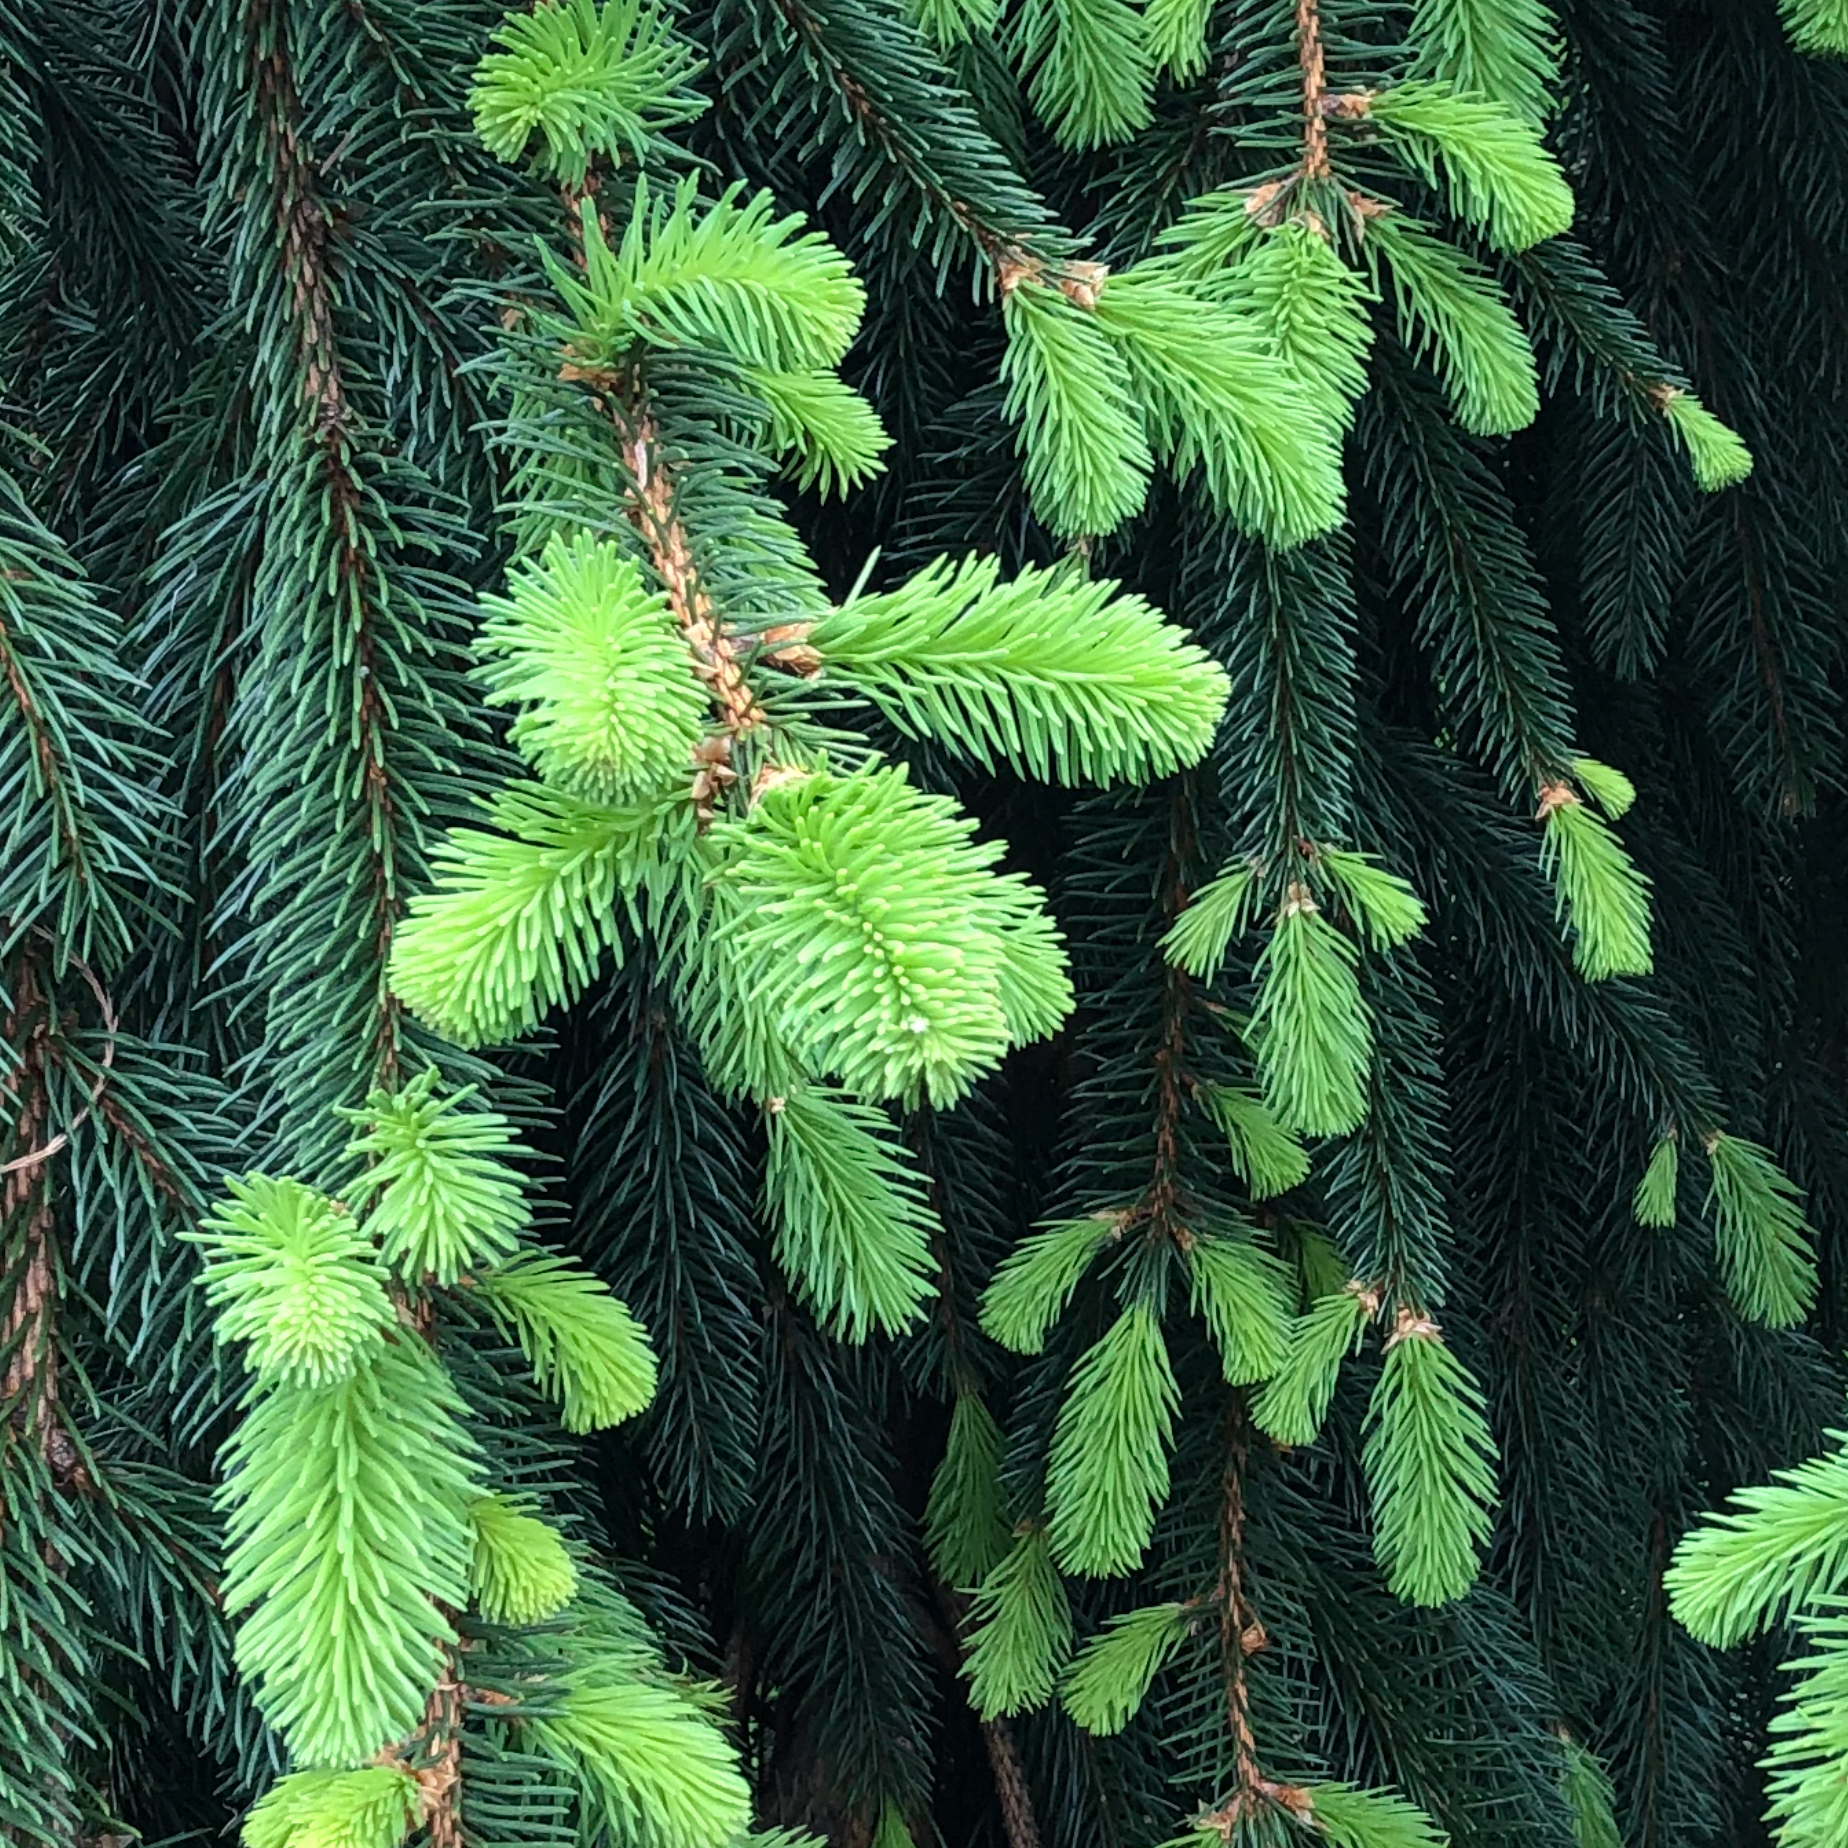 new bright green growth on an evergreen